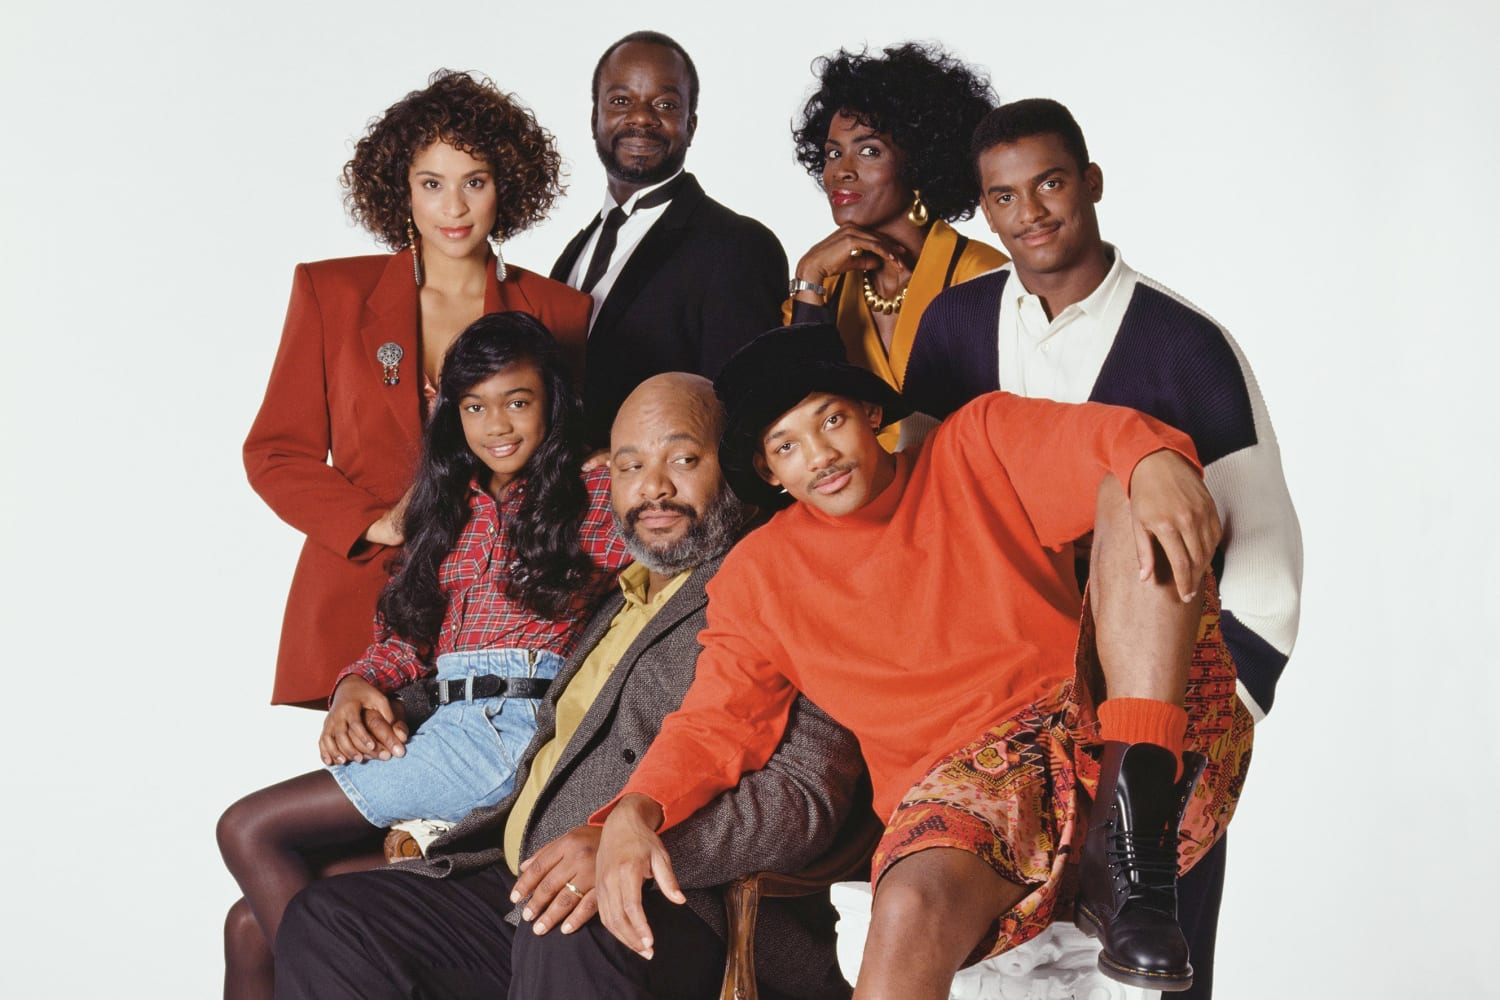 the prince of bel air reunion